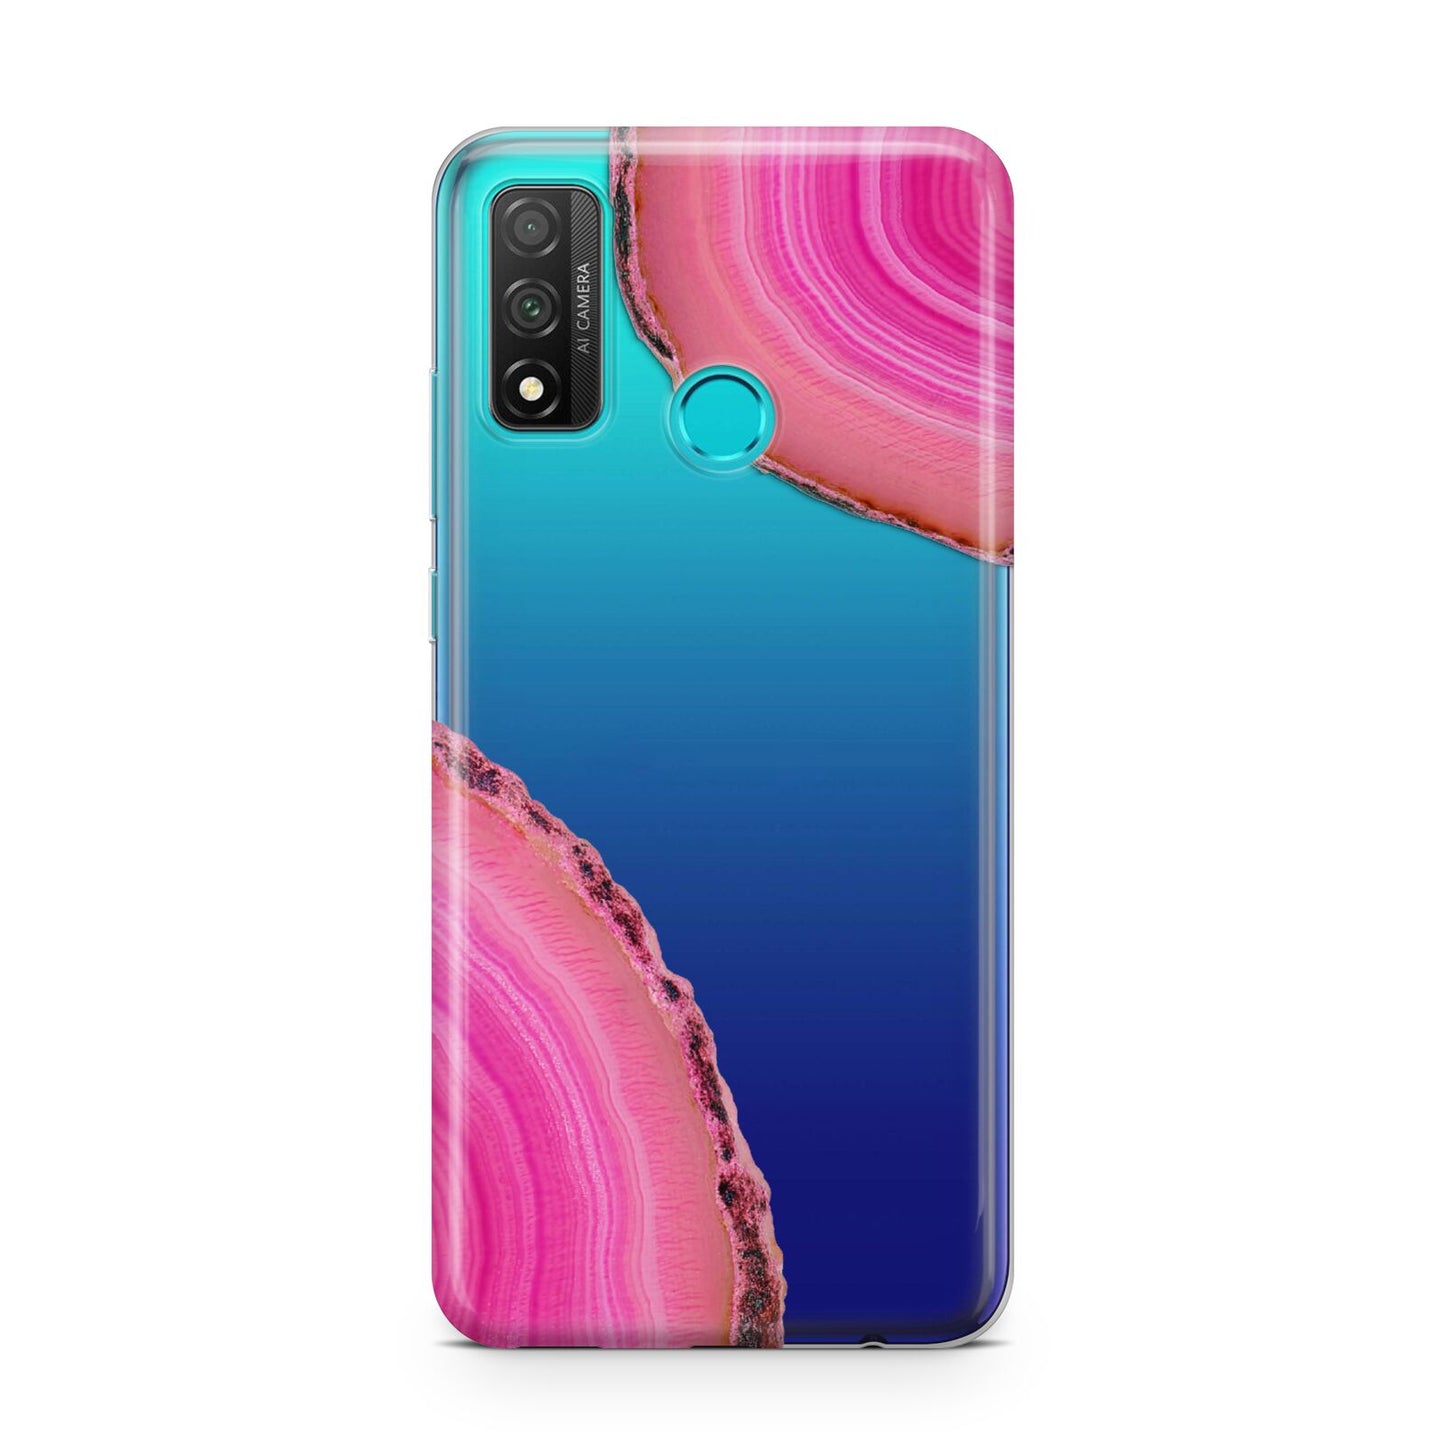 Agate Bright Pink Huawei P Smart 2020